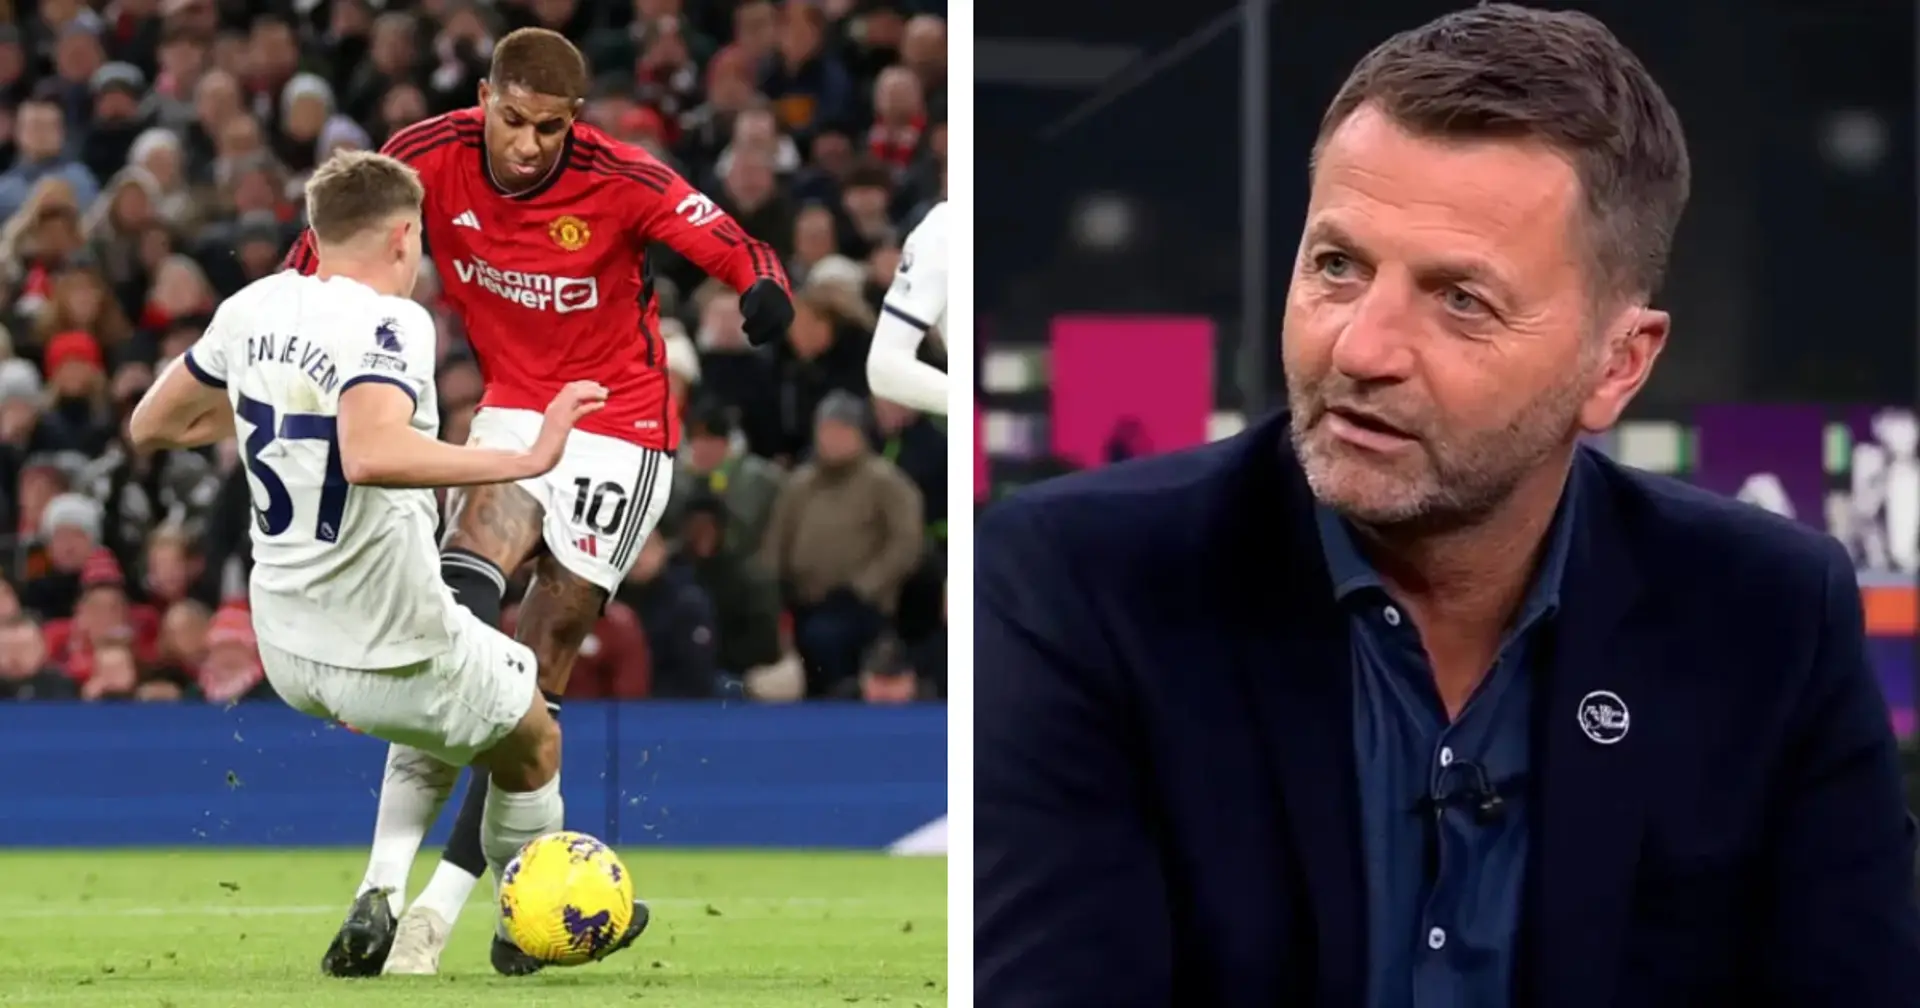 'He can be a real threat': Tim Sherwood explains how Ten Hag can get the best out of Marcus Rashford